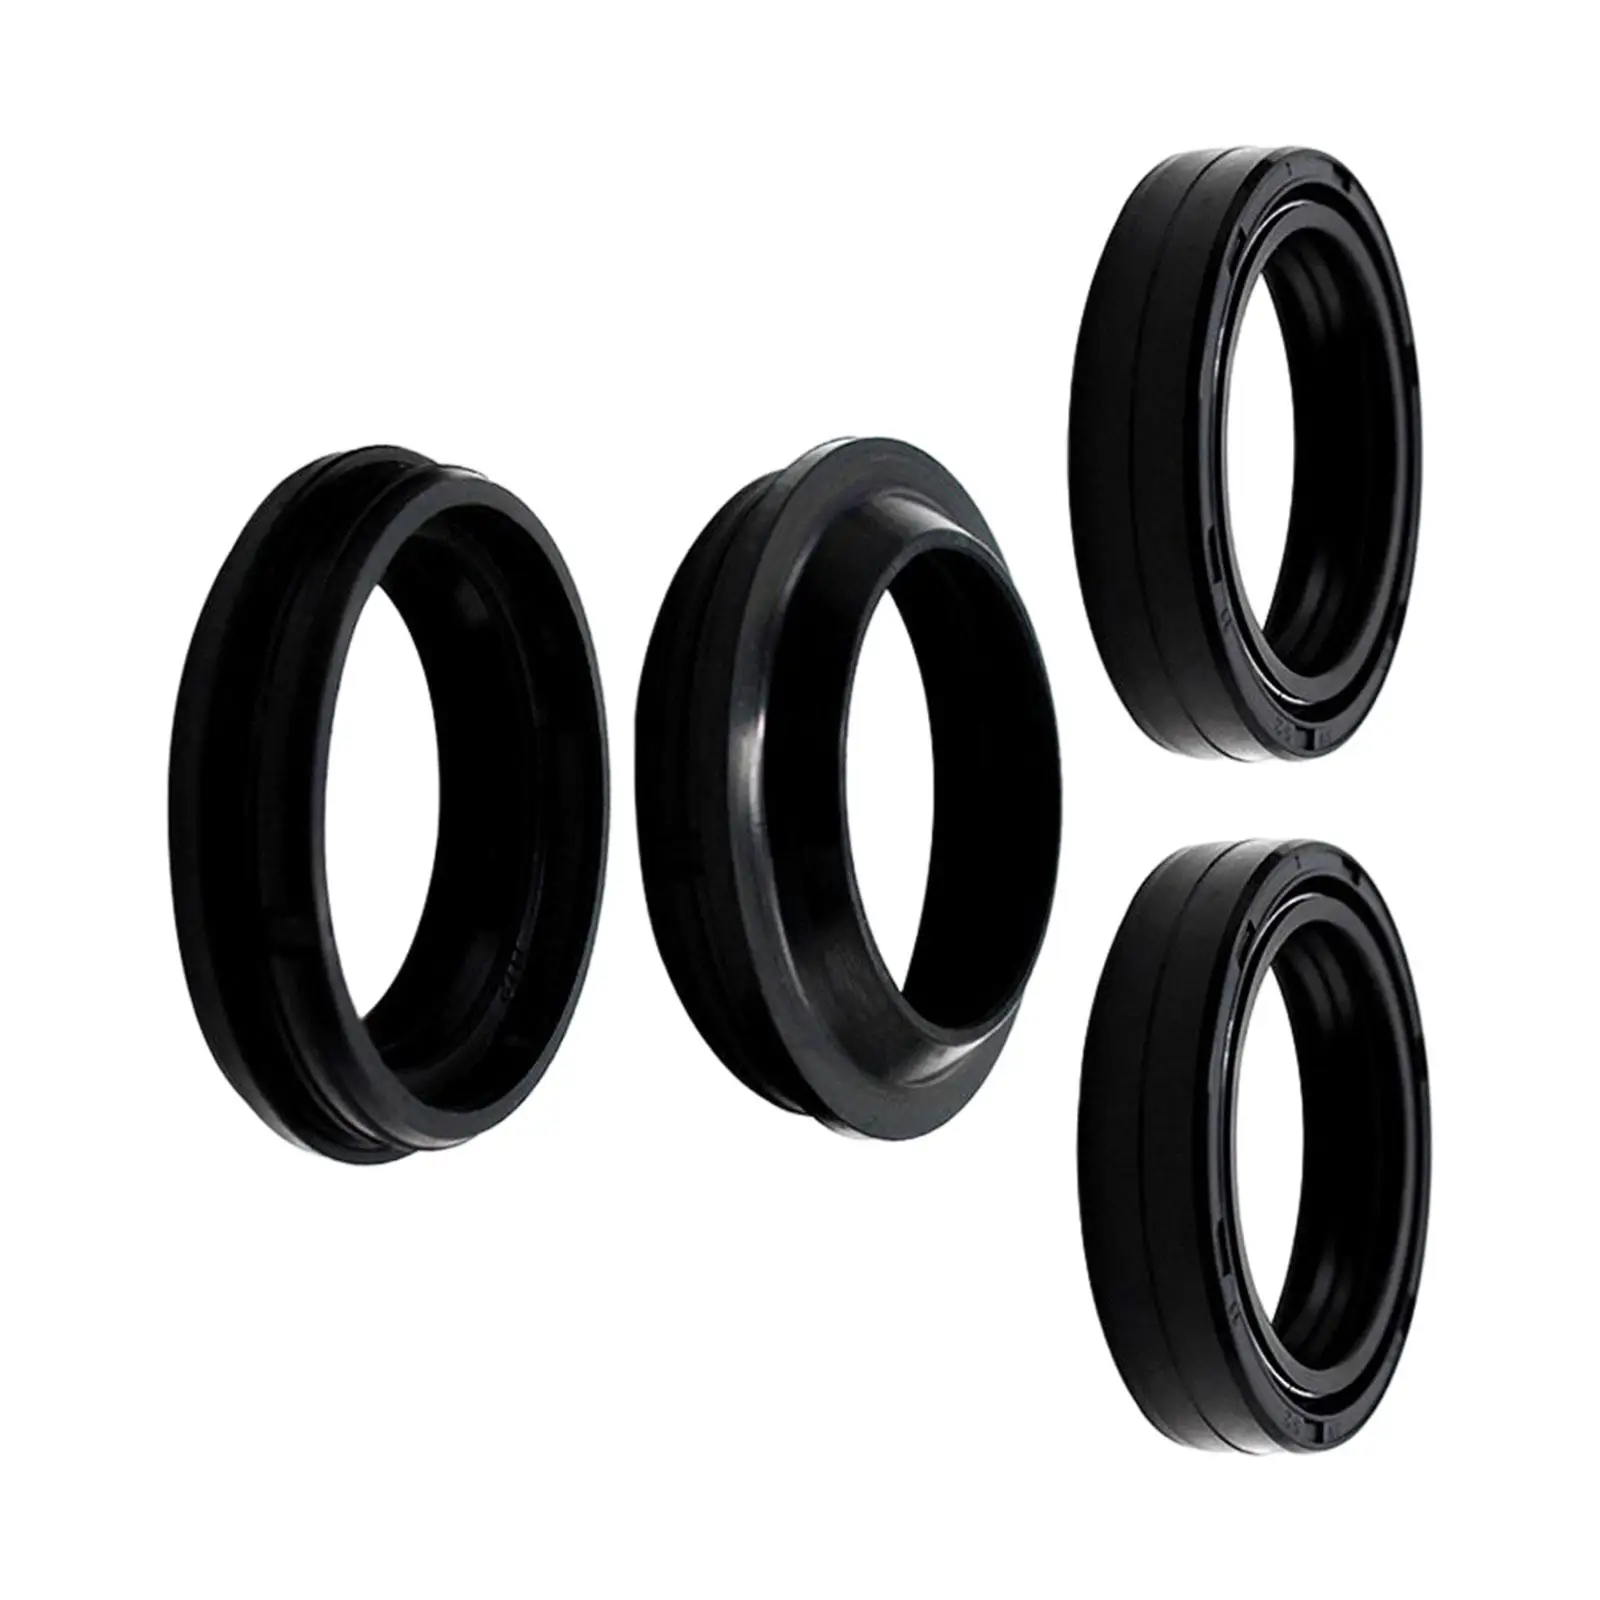 Fork Seal and Dust Seal Kit Accessories for Victory-polaris Vision 1730